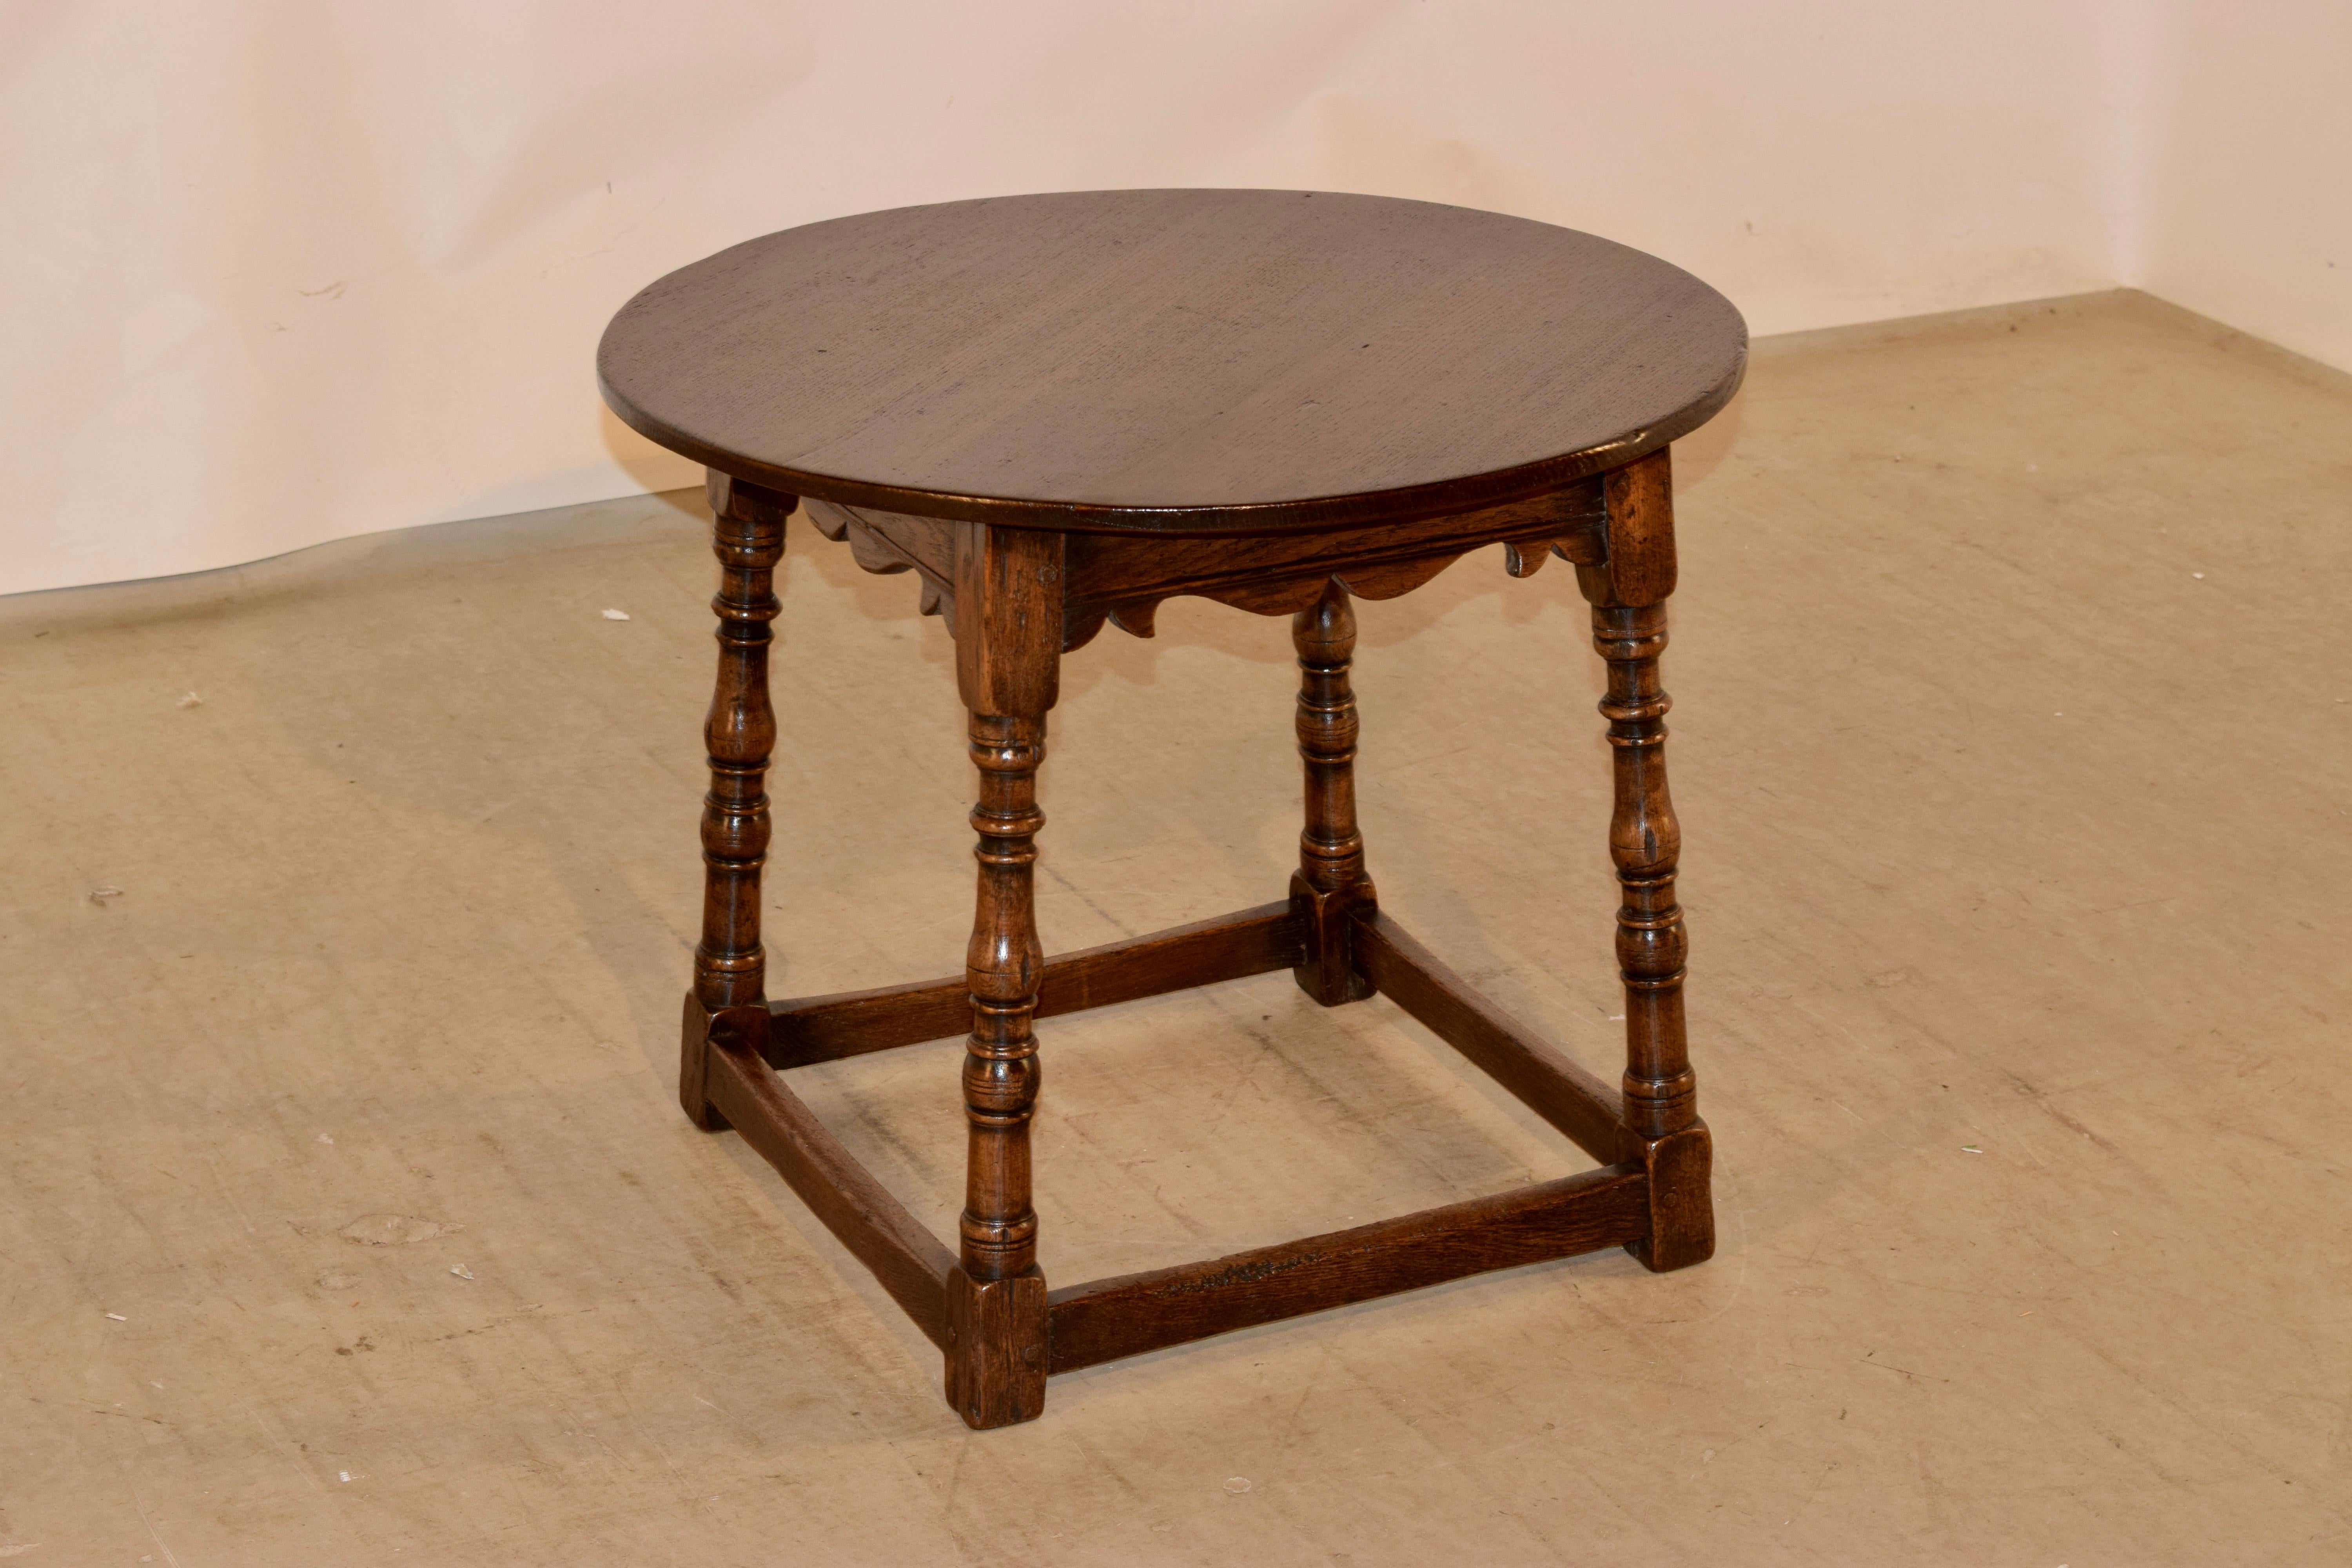 19th century oak cocktail table from England with a round top over a molded and hand scalloped apron and hand turned splayed legs, joined by simple stretchers.